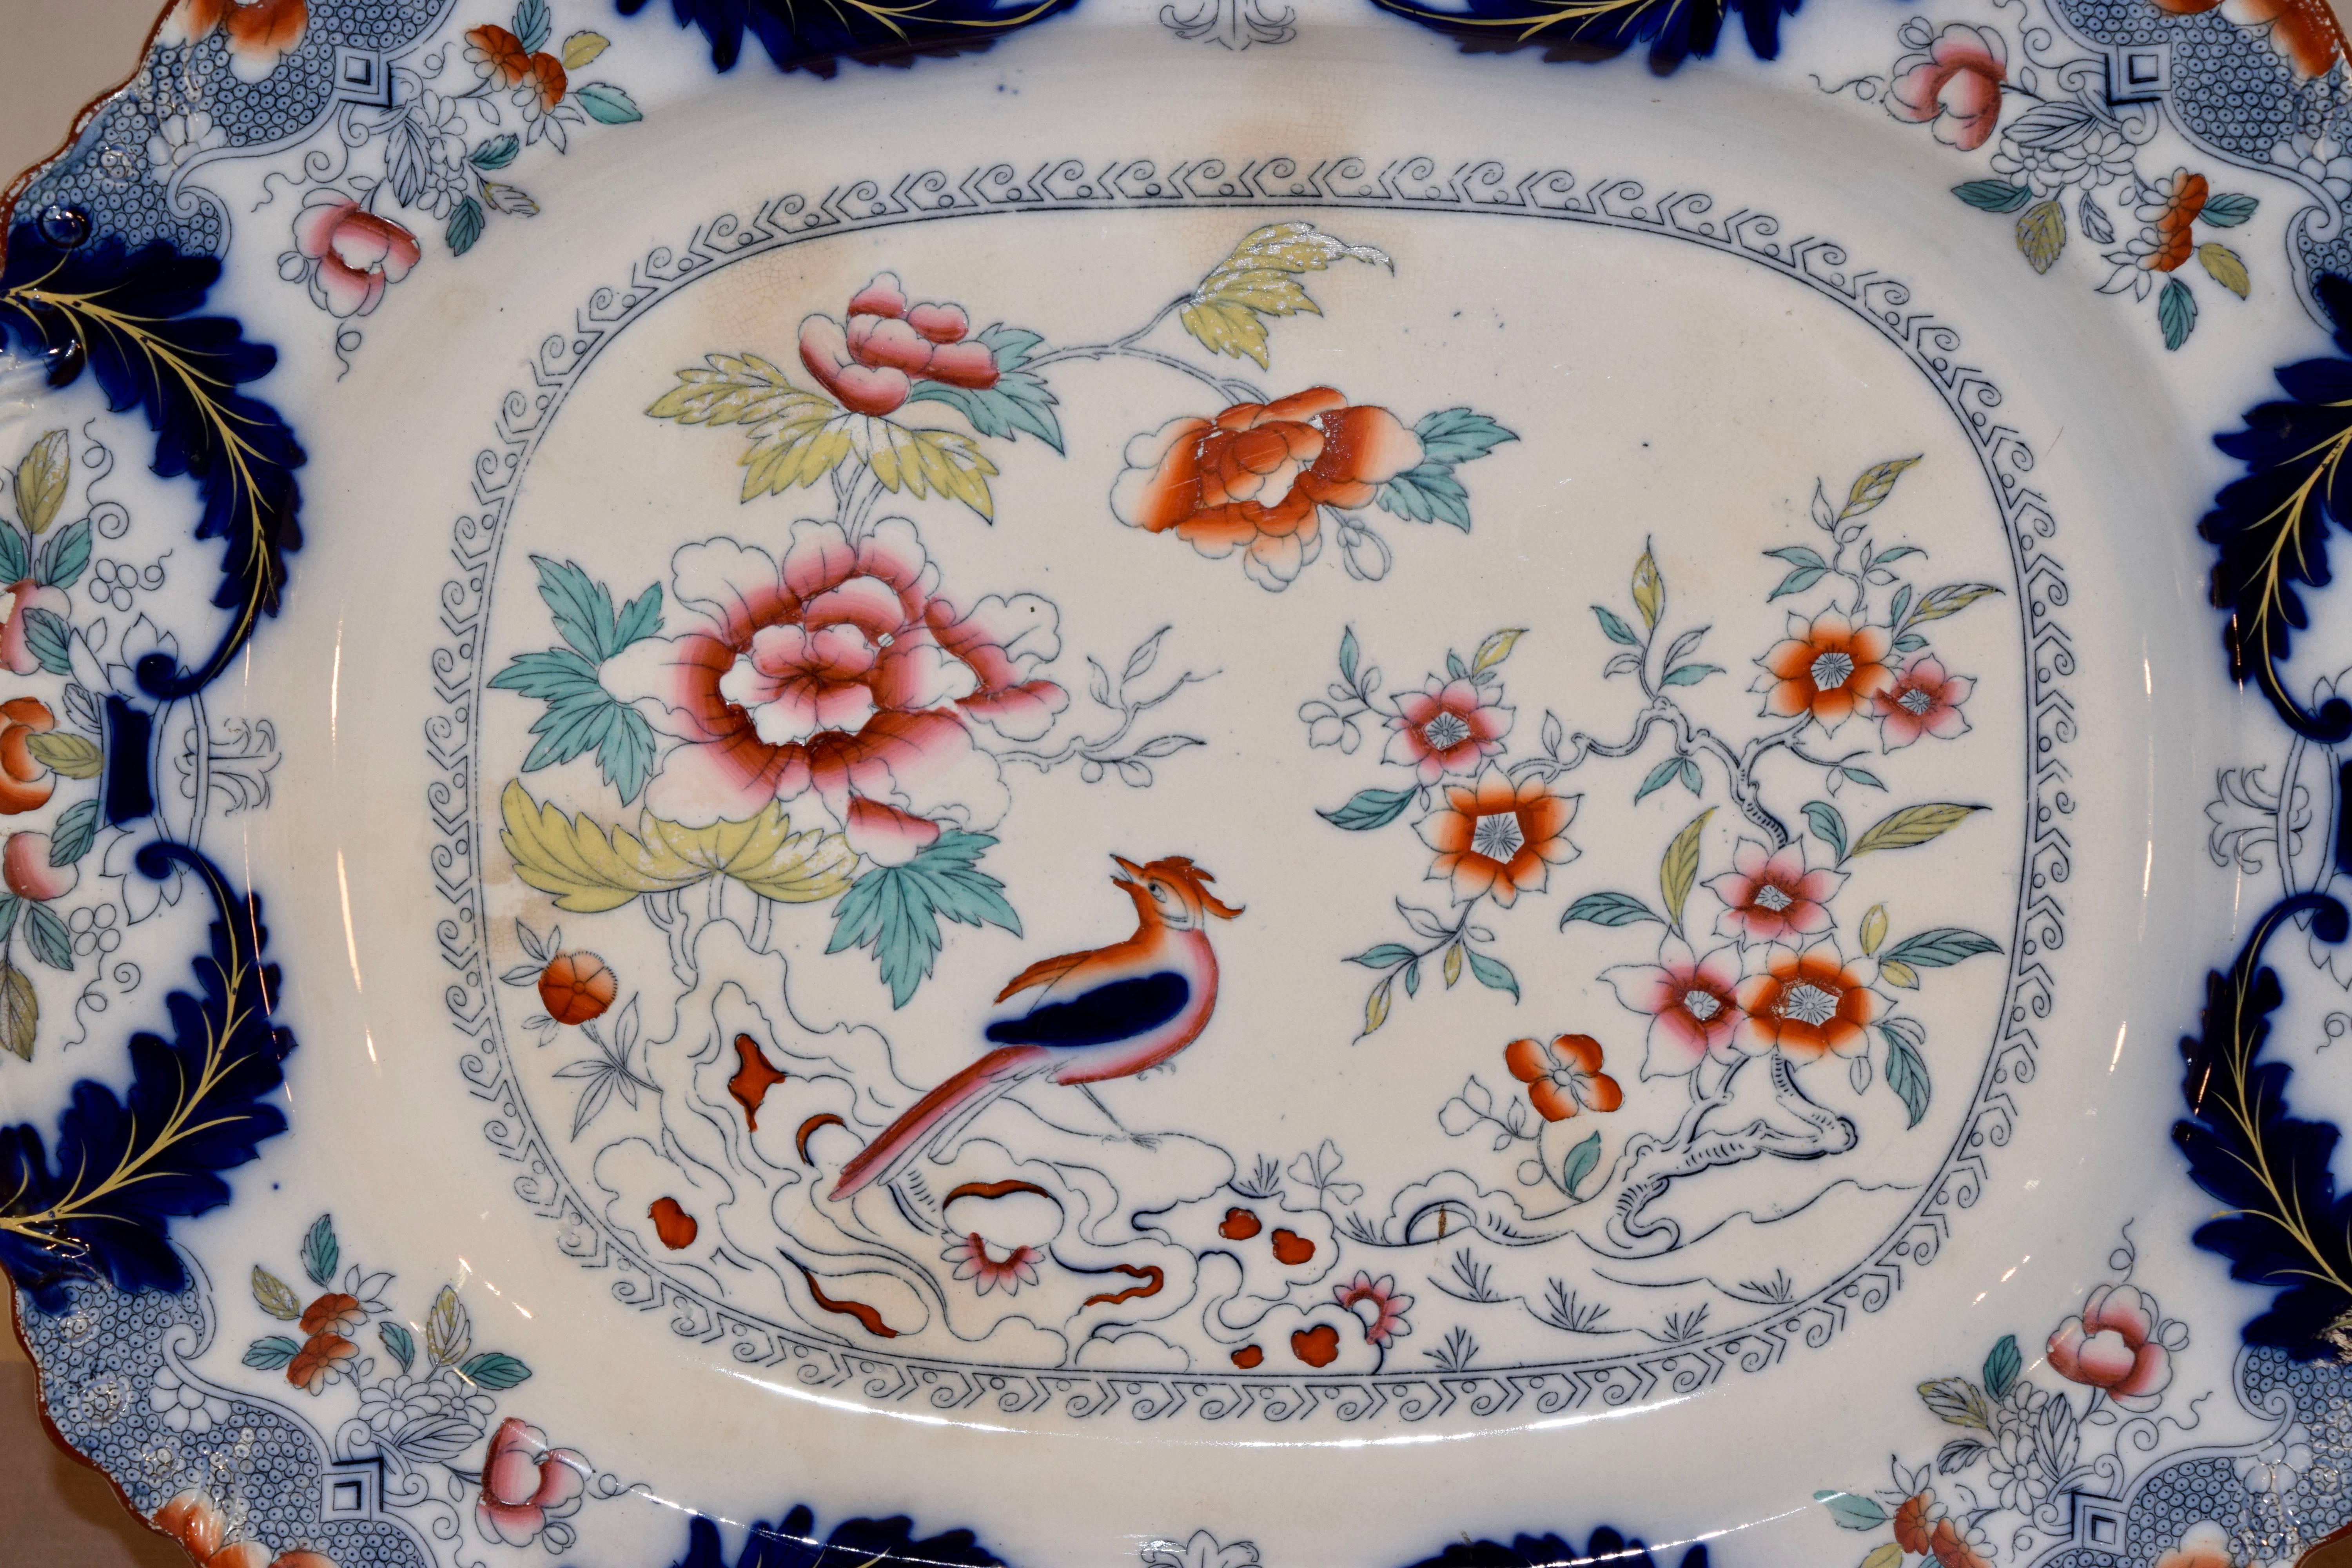 Very large 19th century English ironstone platter with transfer of birds and flowers, which has then been hand polychromed for lovely accents. The edge of the platter is scalloped as well. There is a date lozenge on the back which is indecipherable.